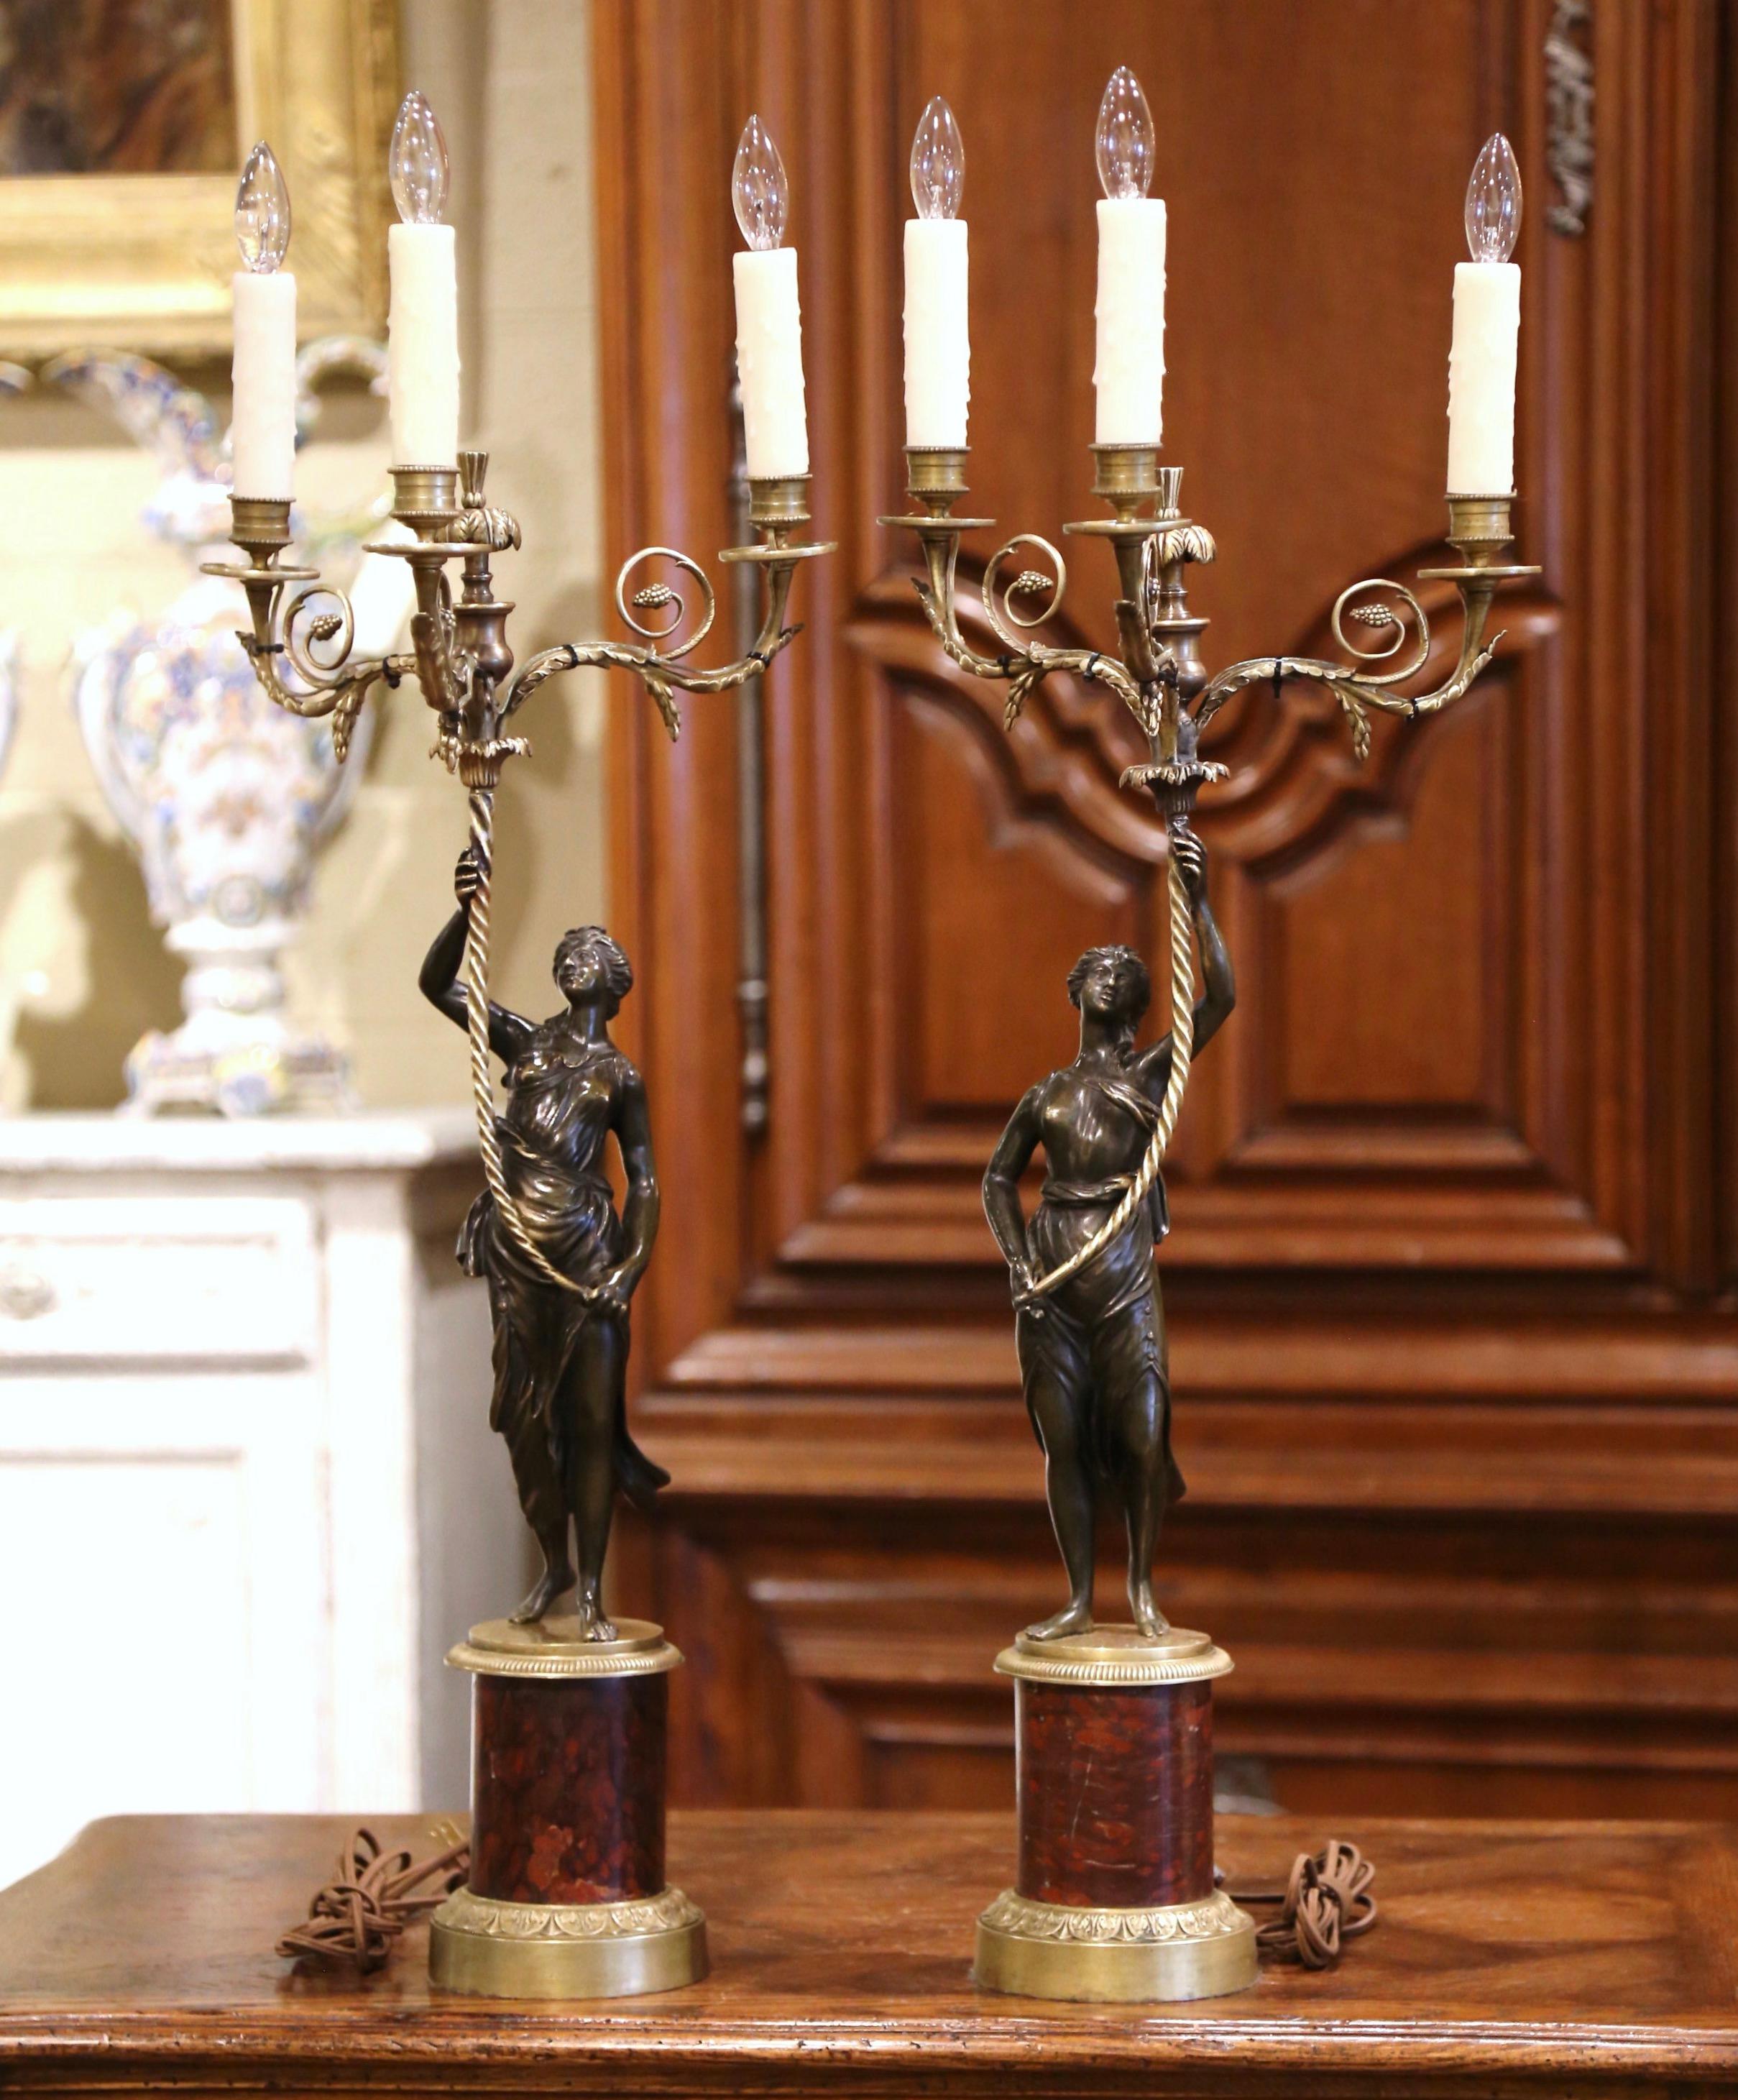 Napoleon III Pair of 19th Century French Patinated Bronze and Marble Three-Light Candelabras